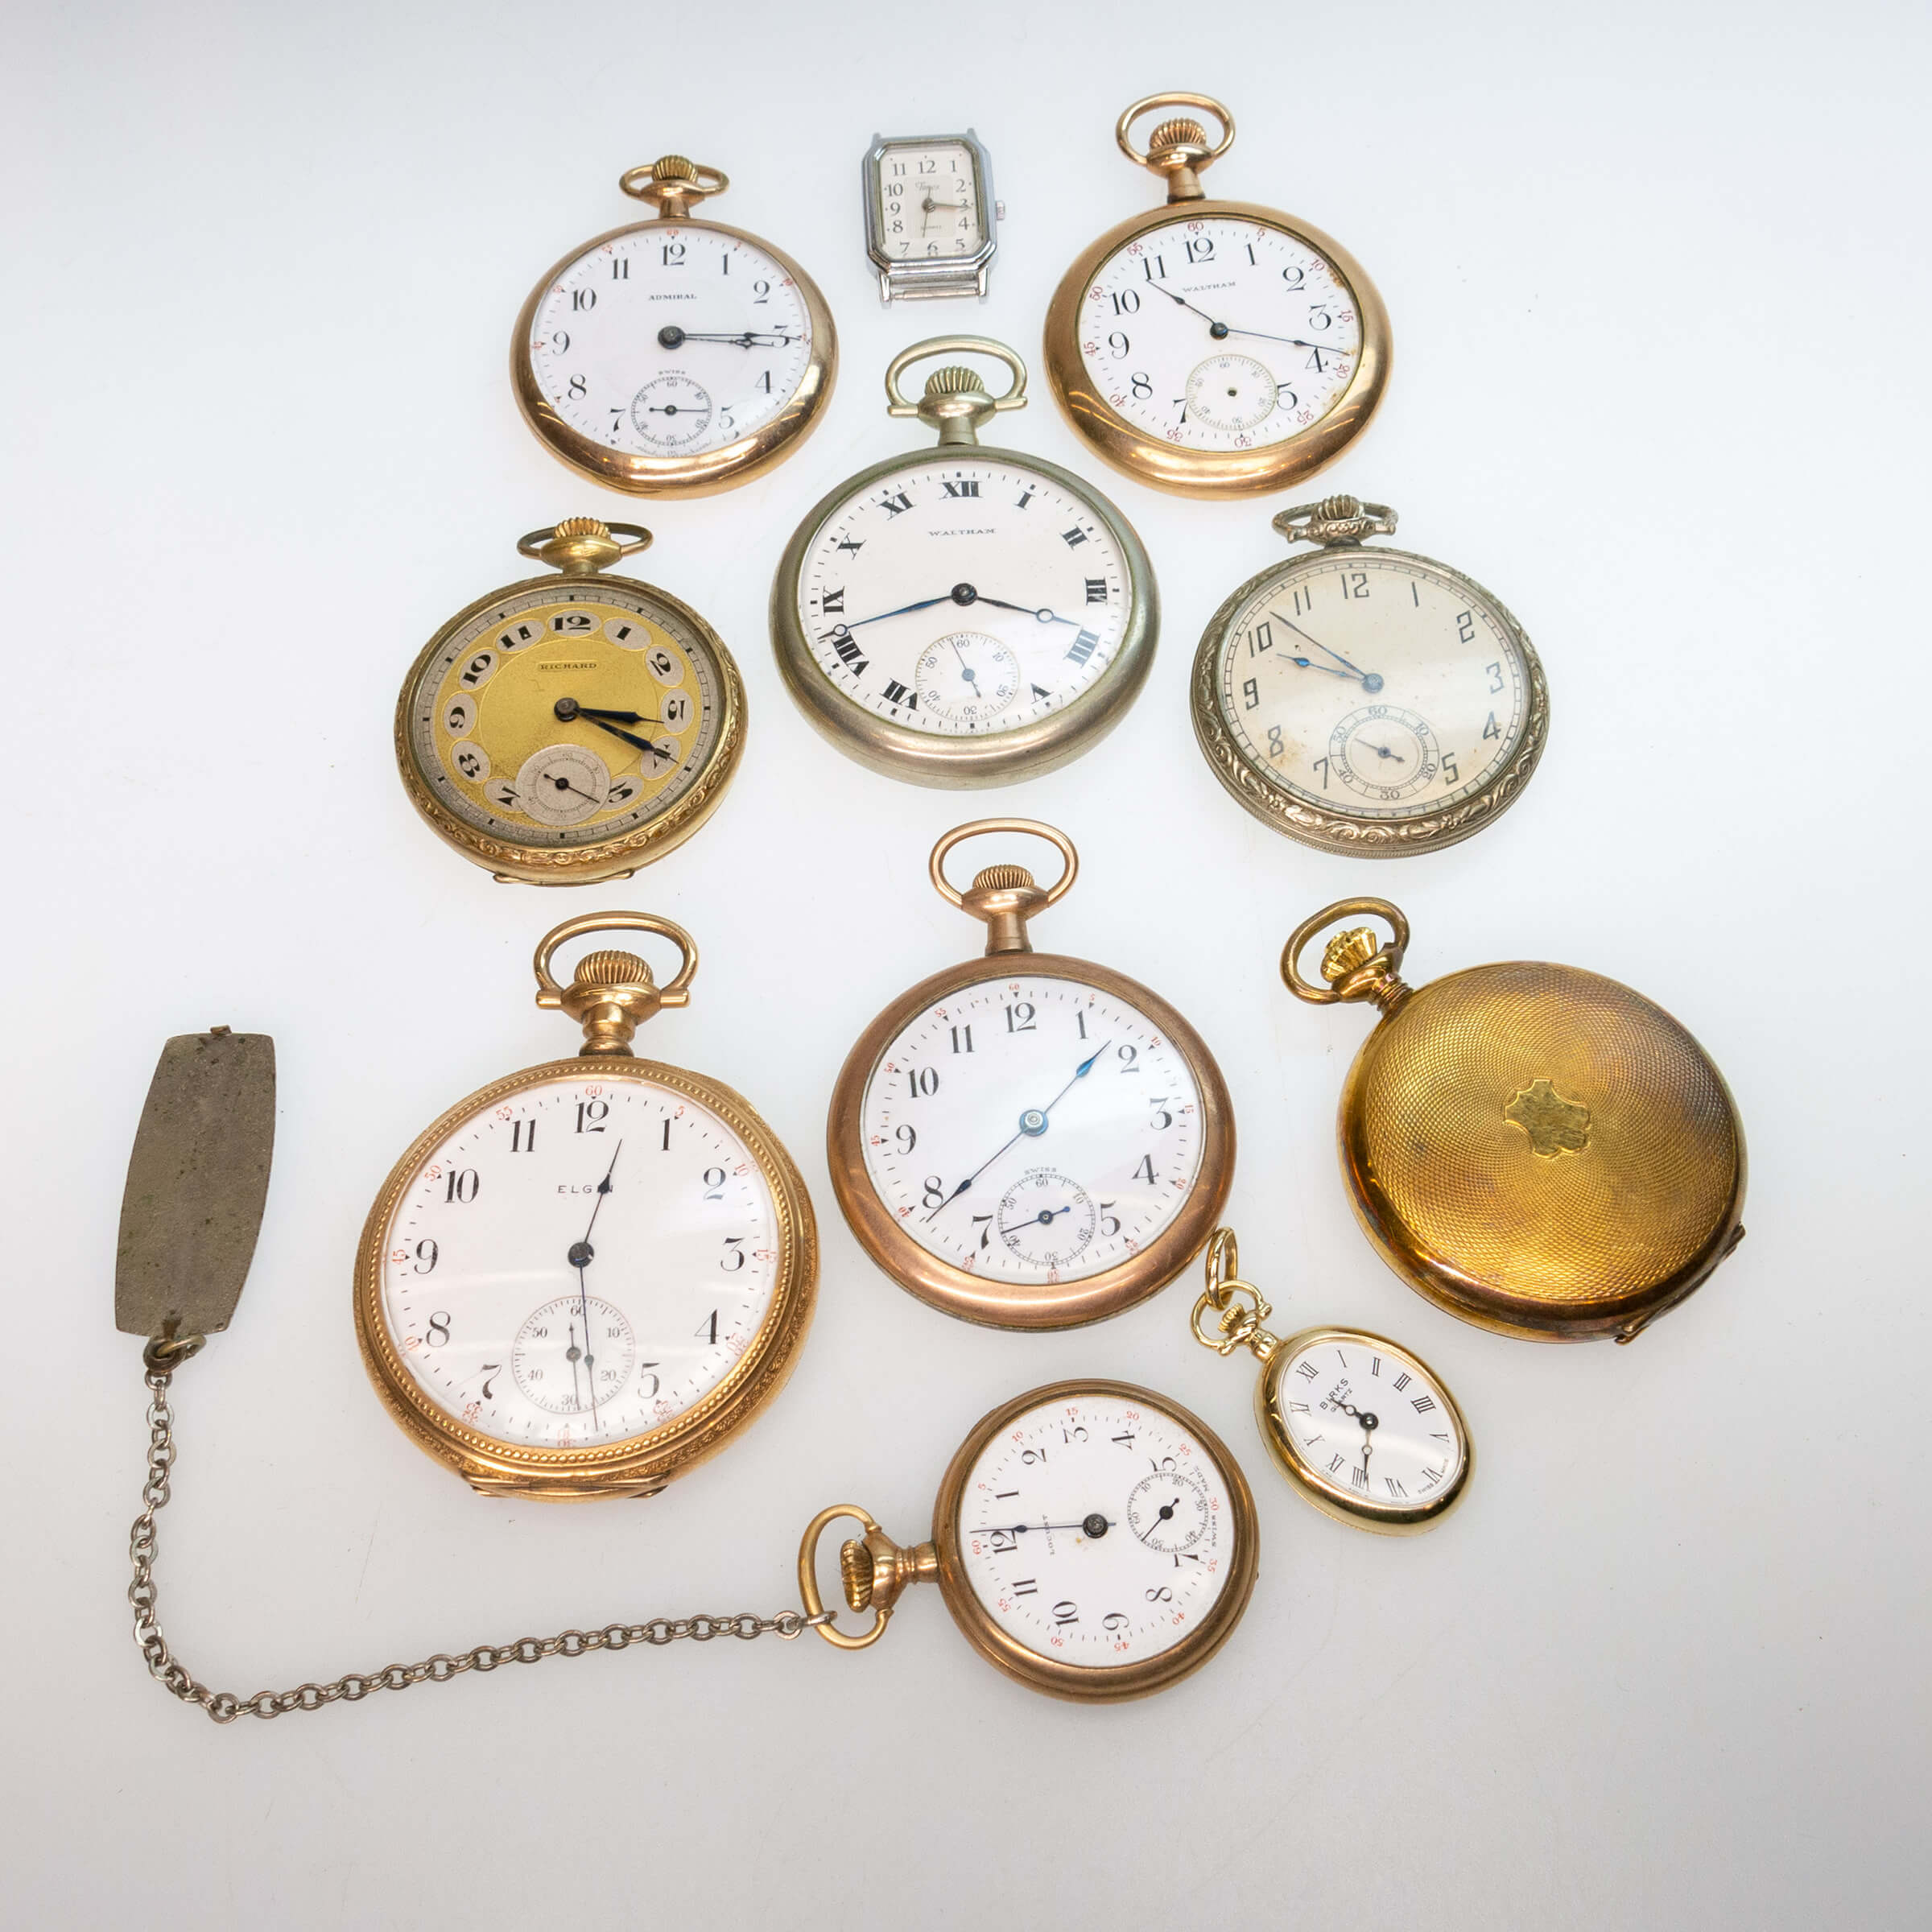 11 Various Watches And Pocket Watches